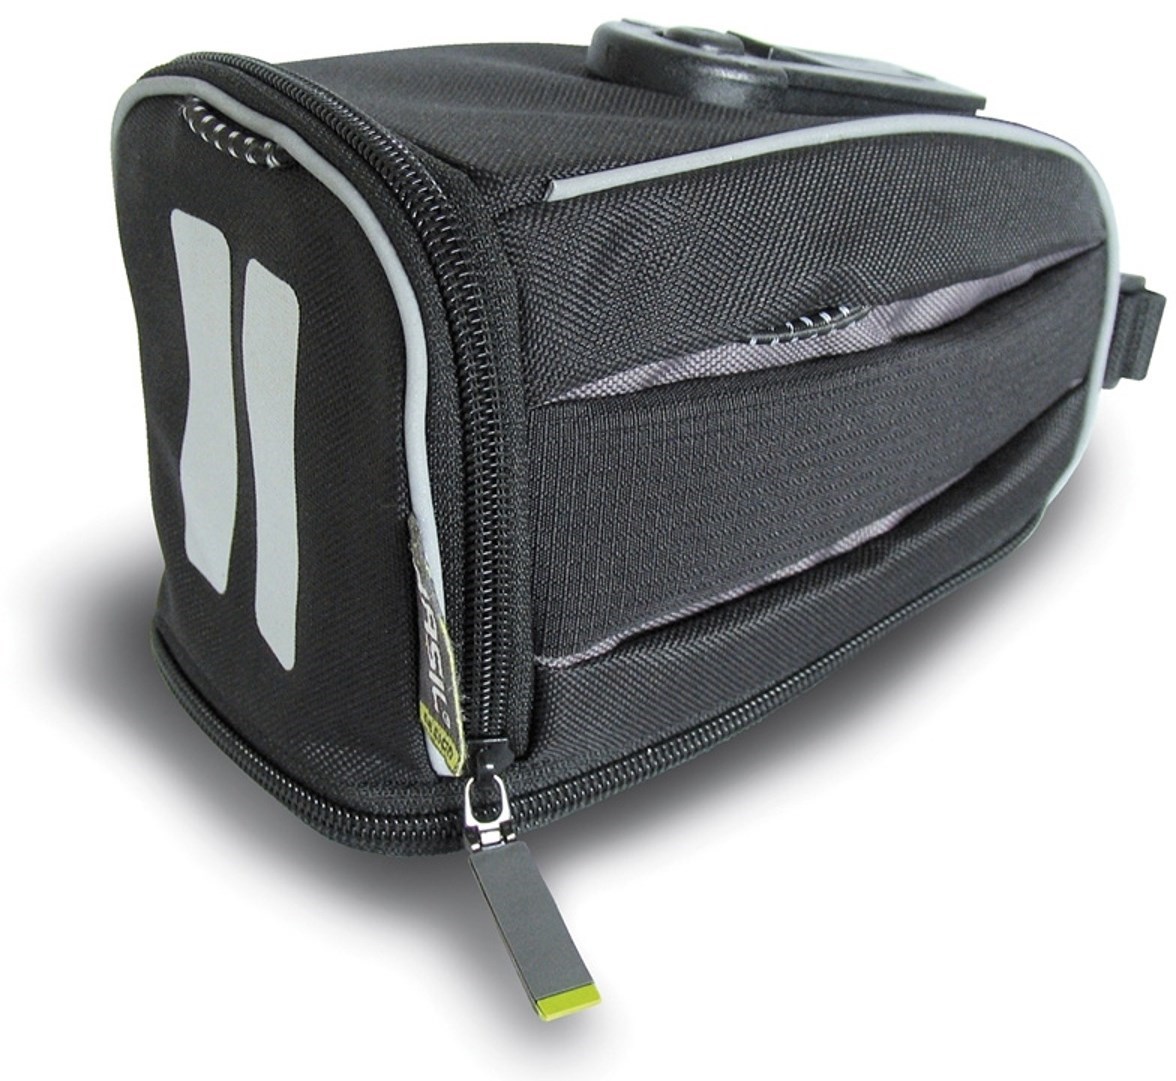 Basil Sports Saddle Water Repellent Bag product image